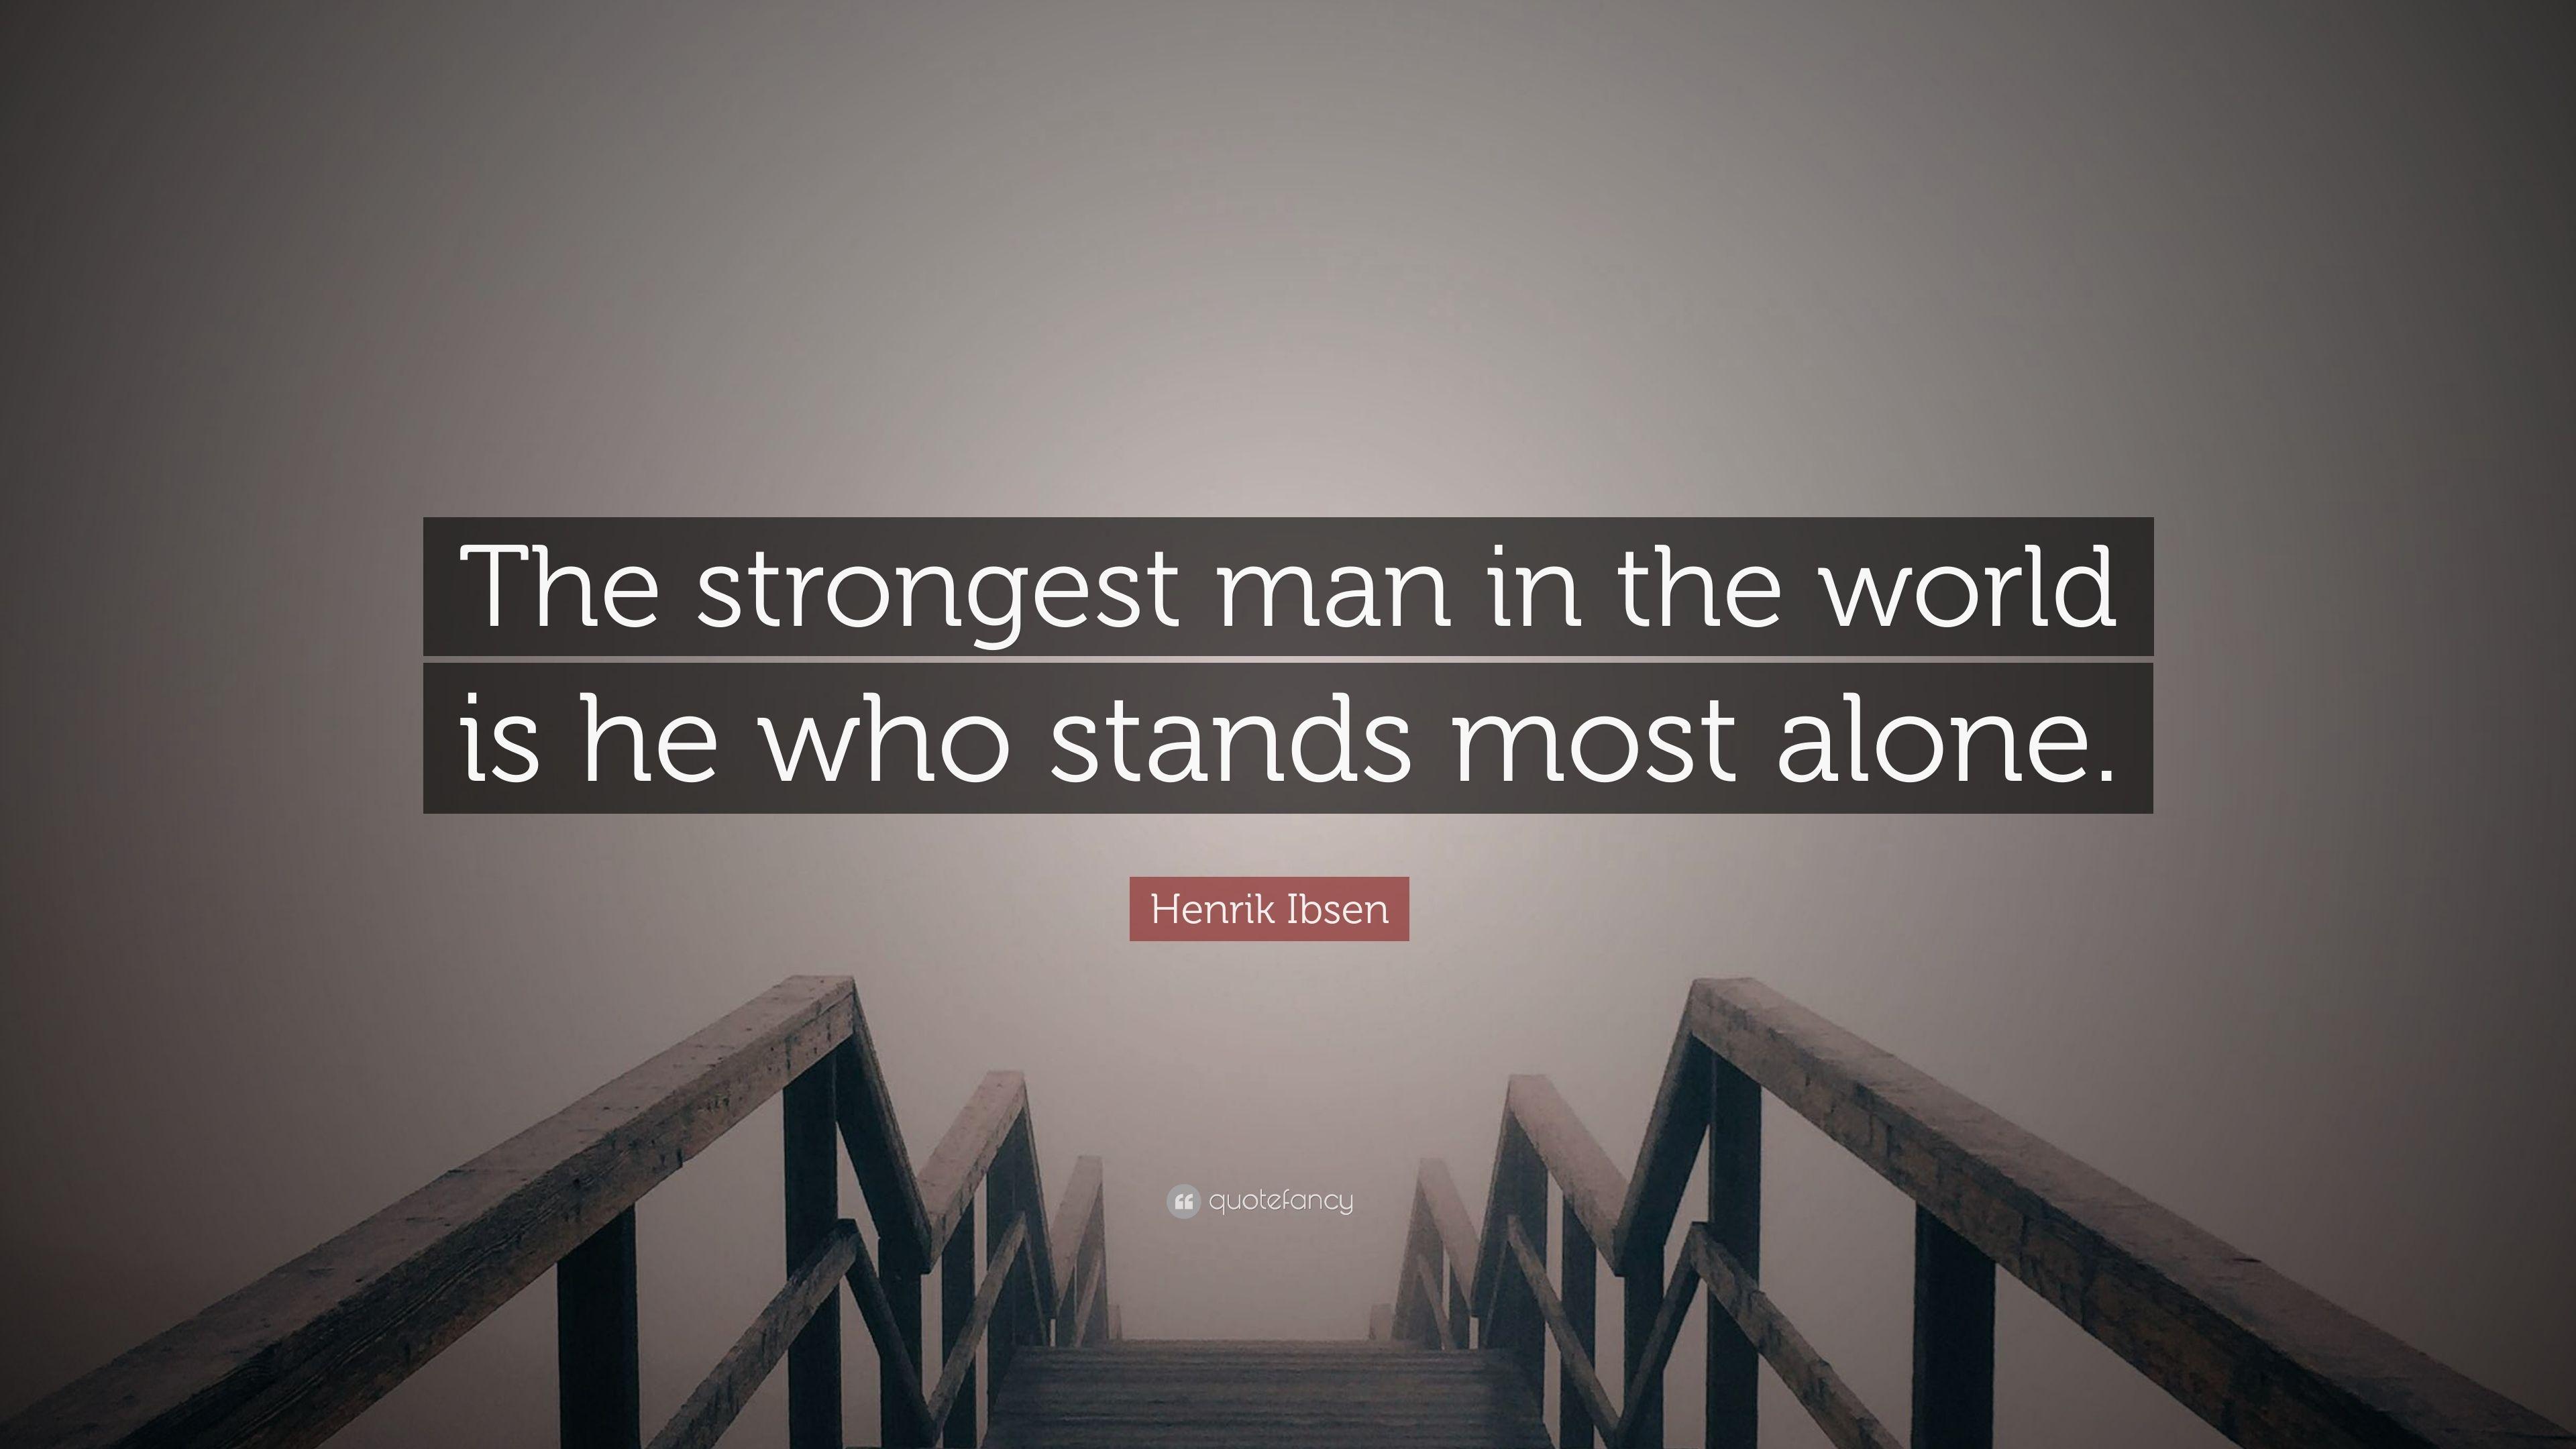 Henrik Ibsen Quote: “The strongest man in the world is he who stands